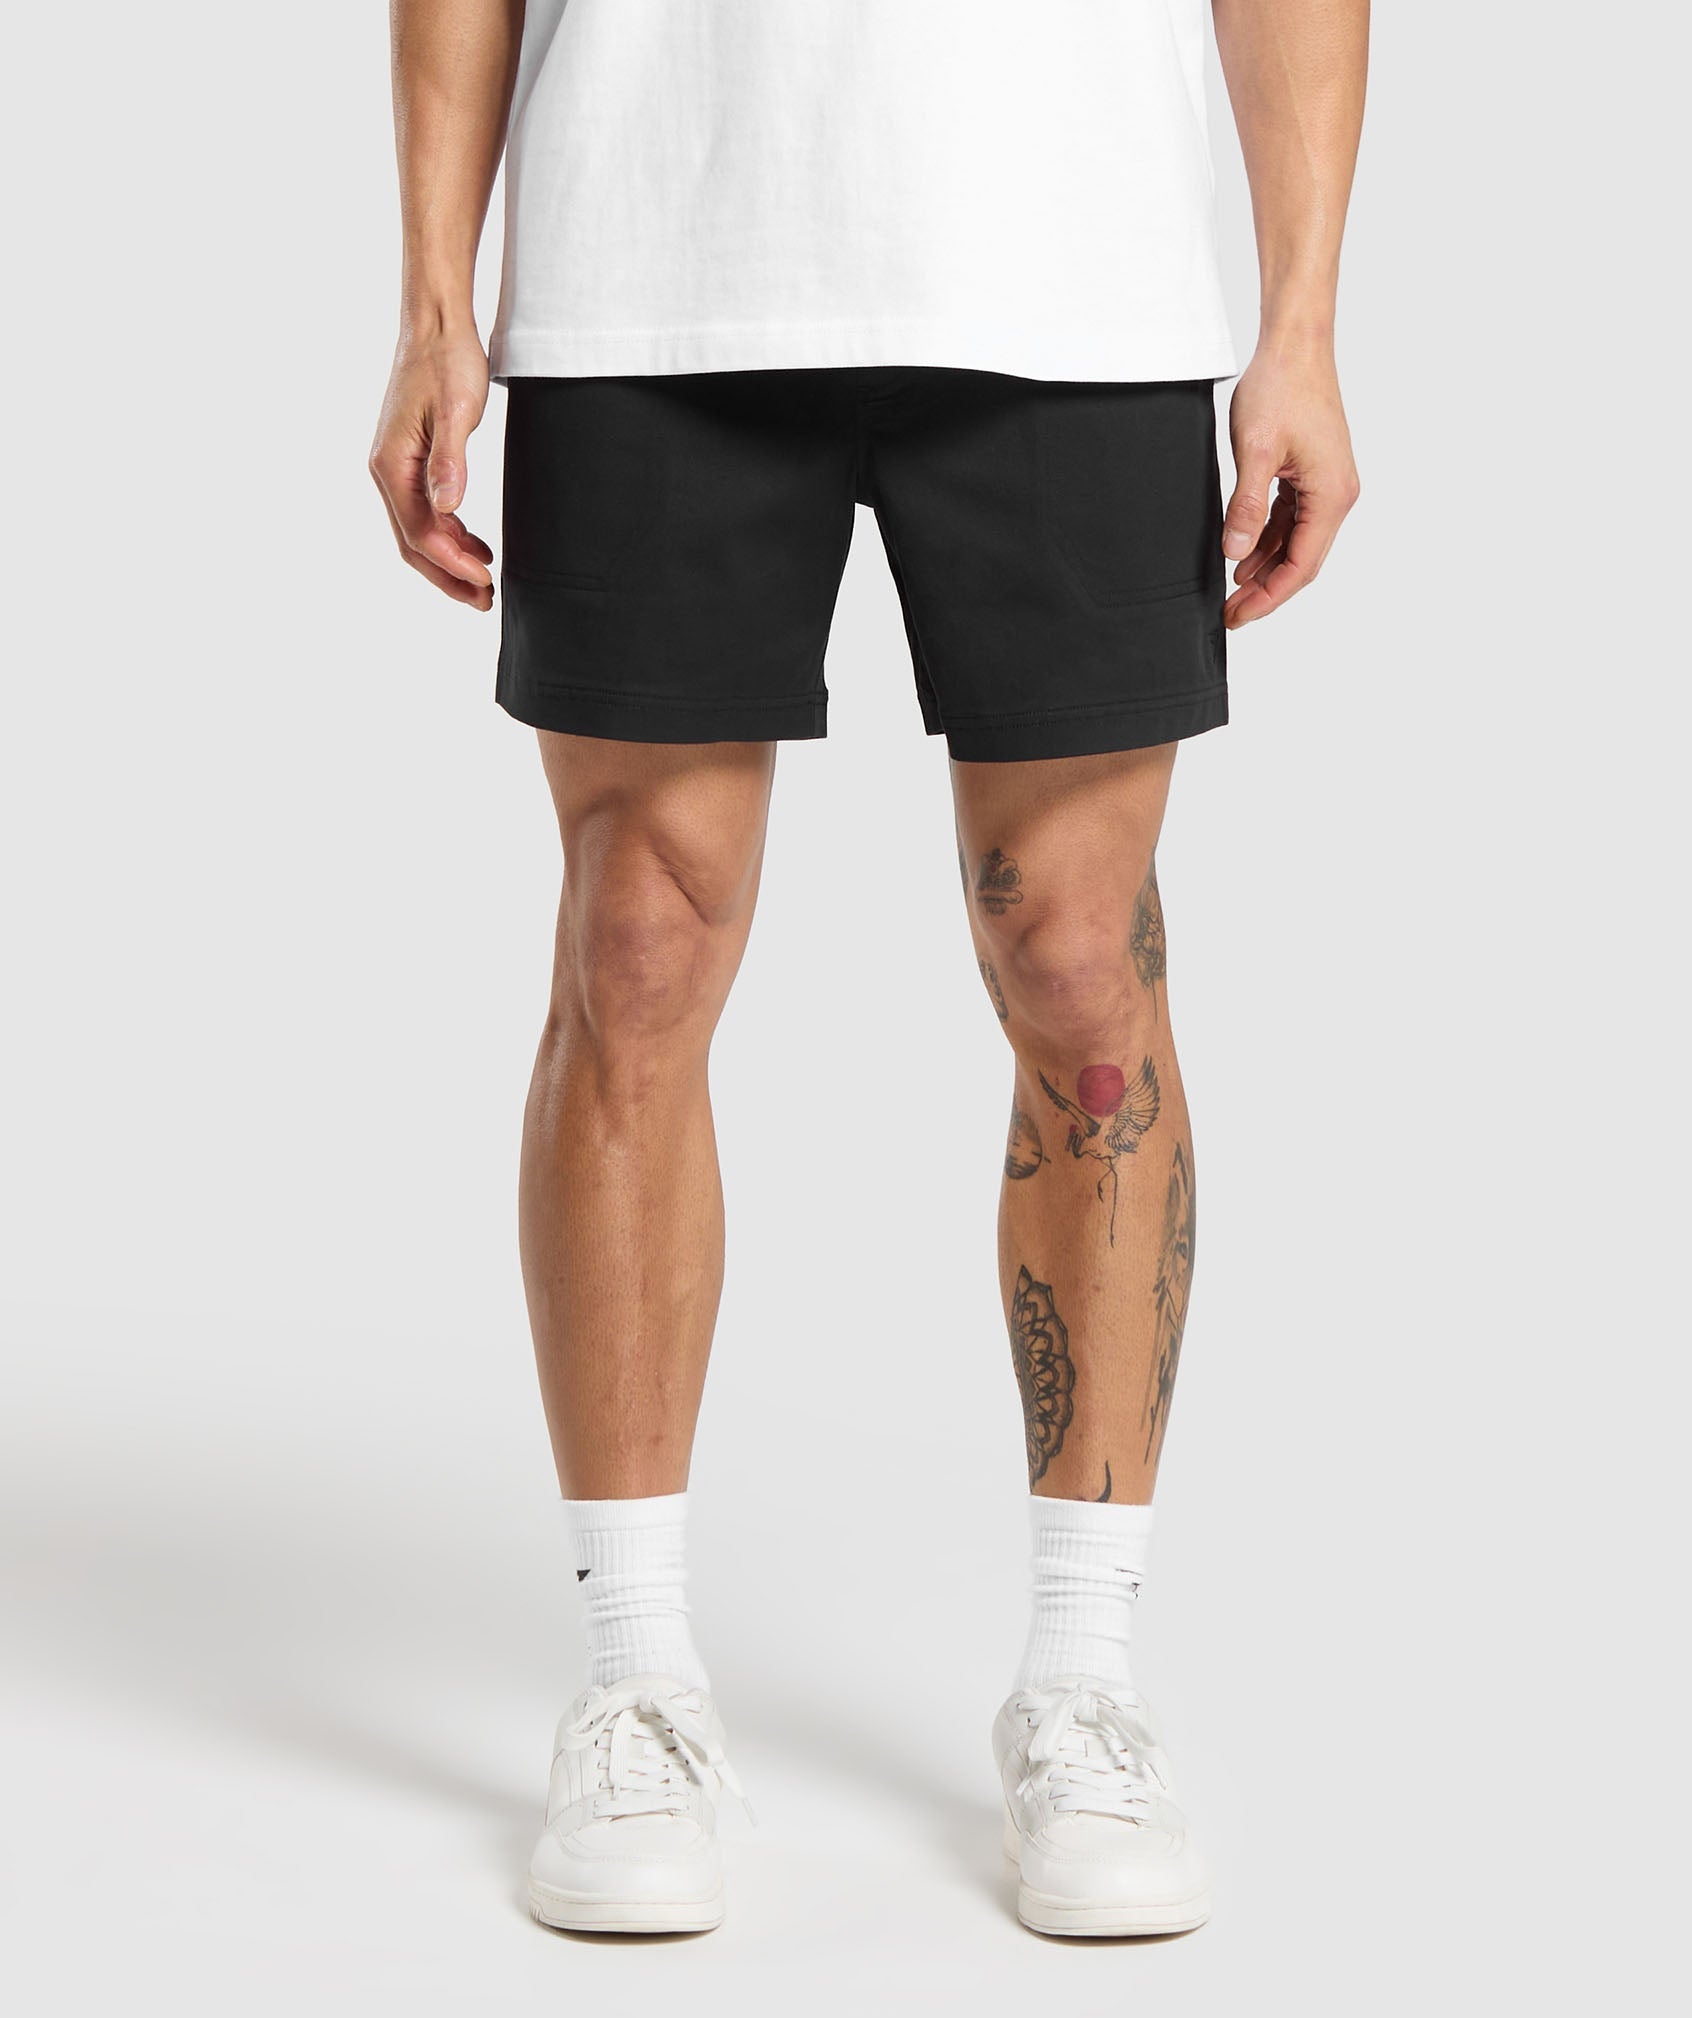 Rest Day Woven Shorts in Black - view 1